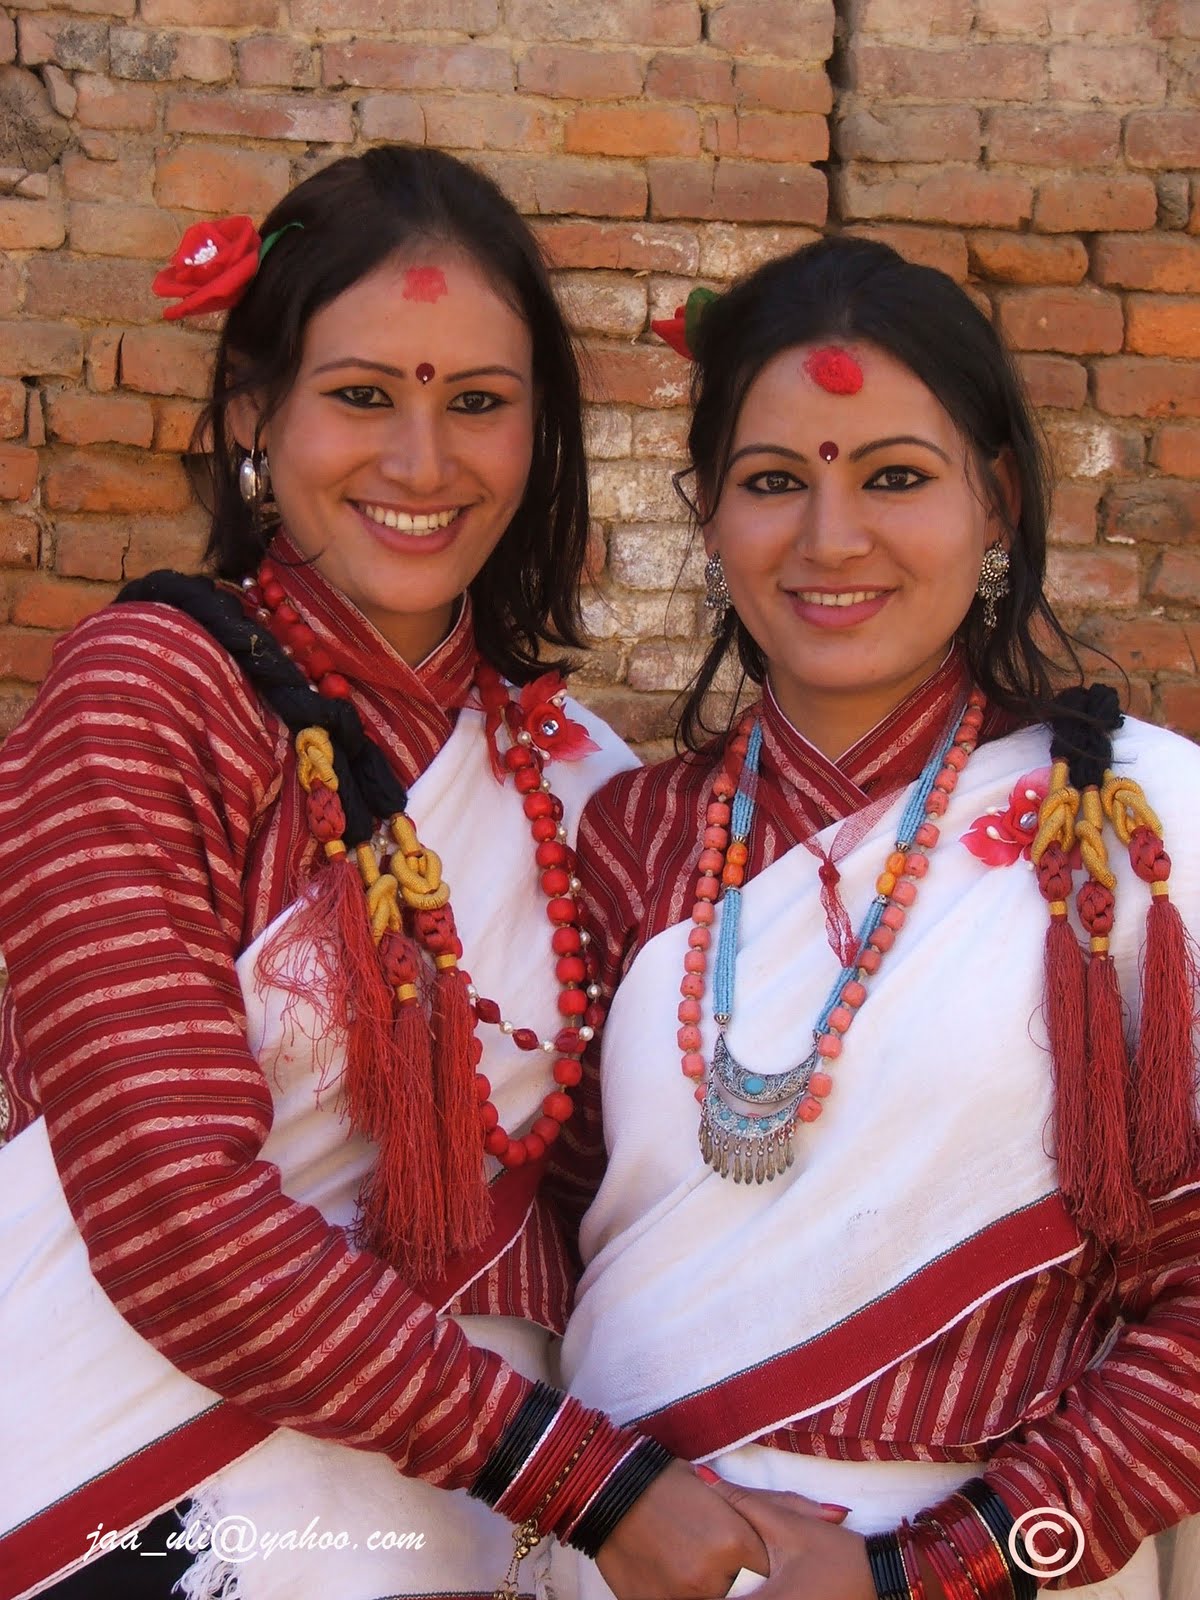 Know Nepal Through Pictures Nepalese People Custome And Festival Brief